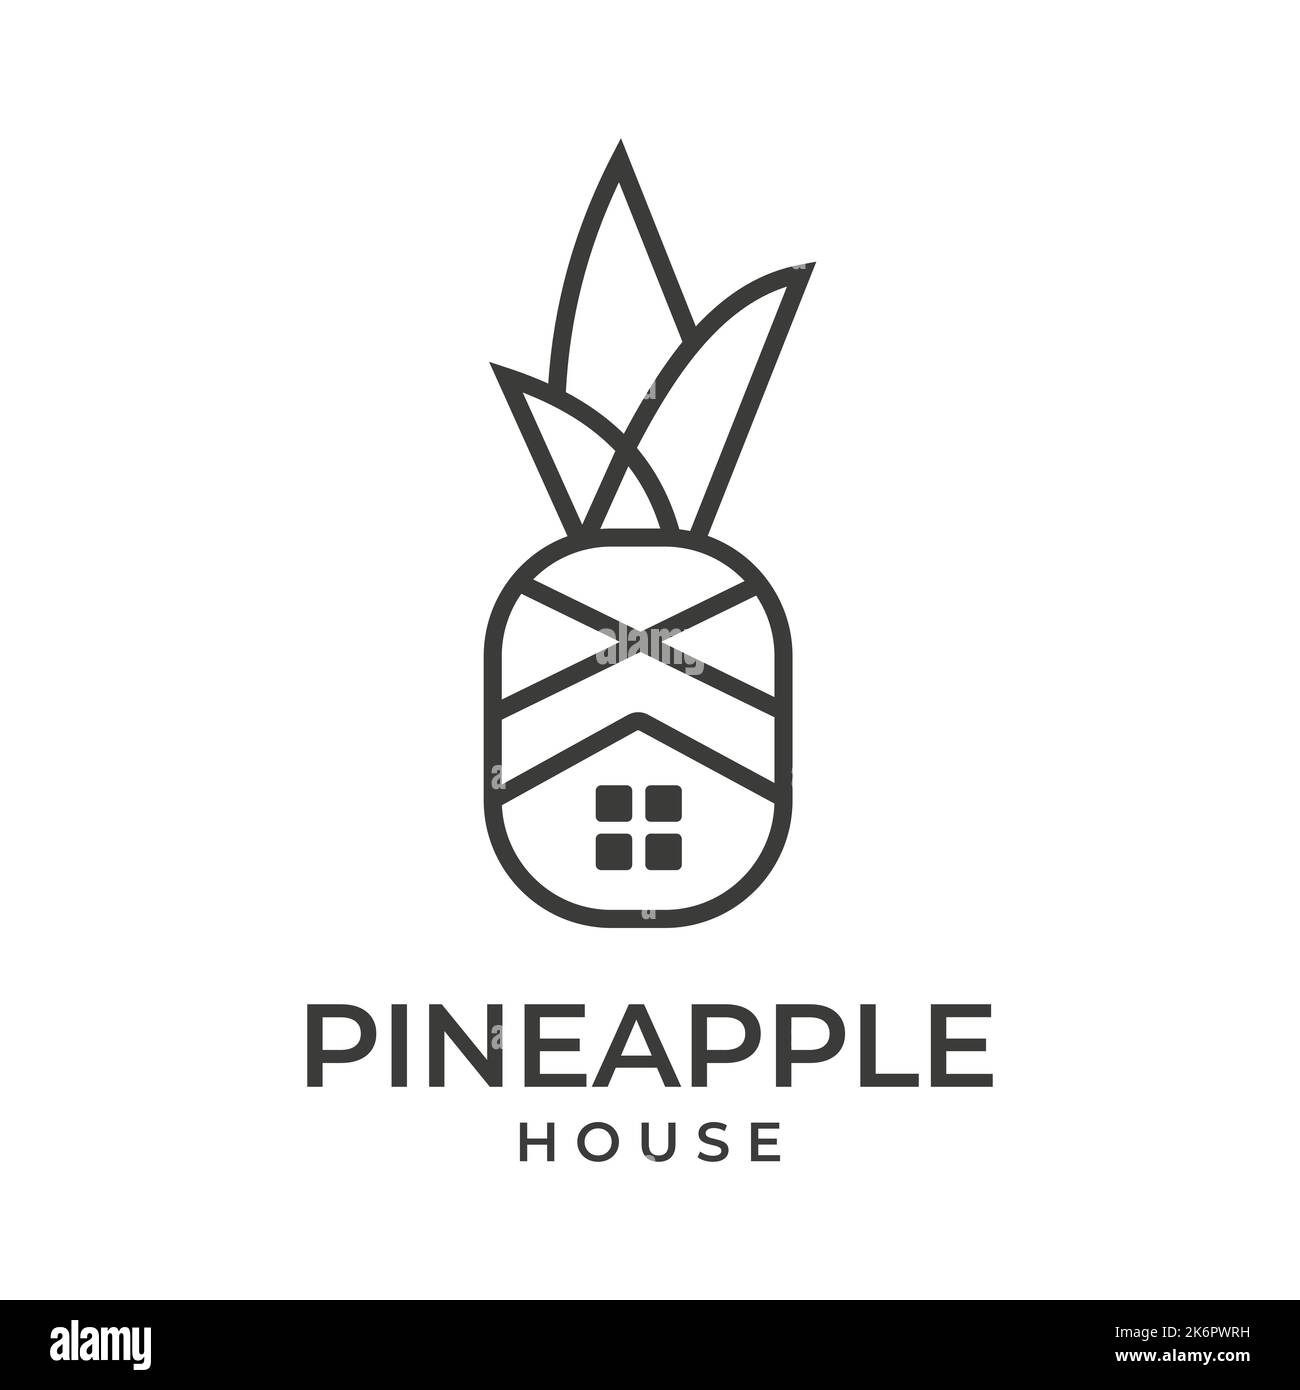 pineapple design logo combination of symbols, house icon in real estate graphic art Abstract graphic illustration of pineapple in the form of a house Stock Vector